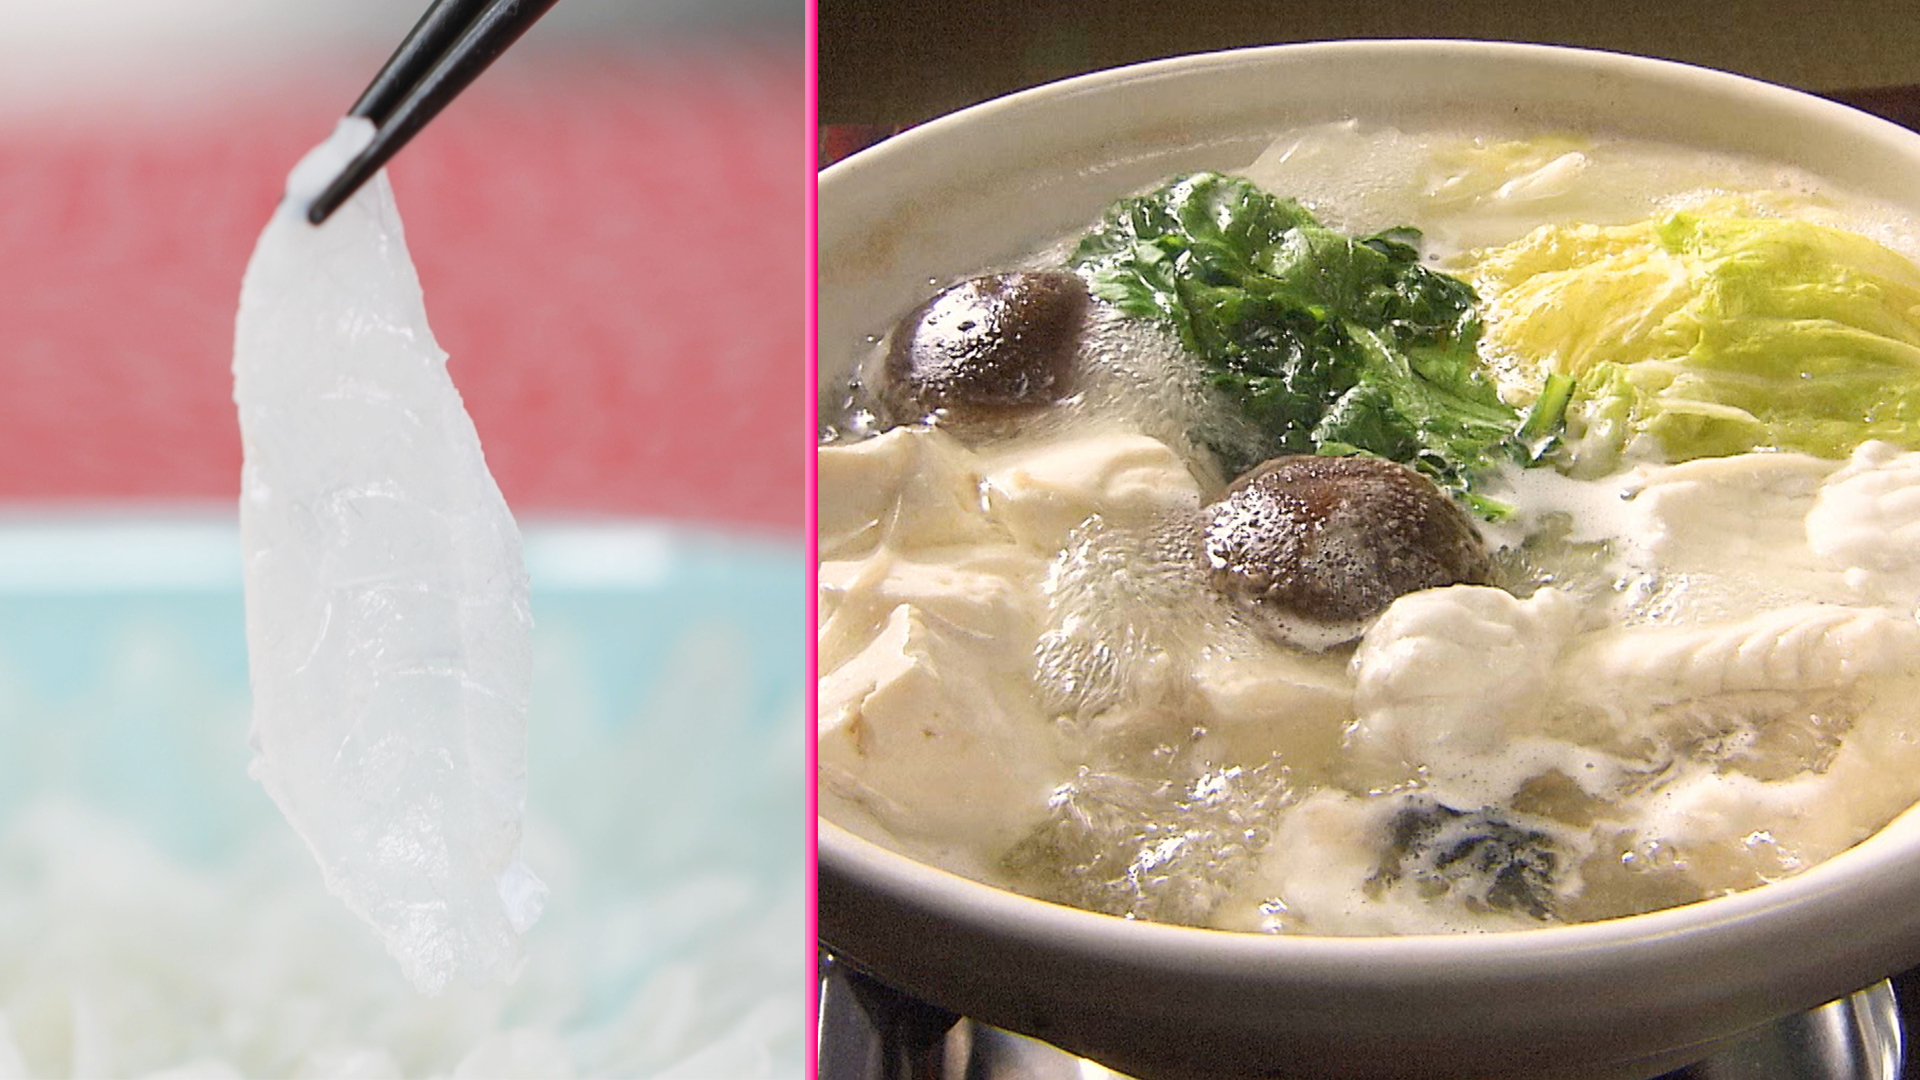 Fugu is usually sliced thinly and eaten as sashimi. It's the best way to enjoy its chewy texture. Another classic fugu dish is nabe hotpot. The broth is infused with the rich umami of fugu.